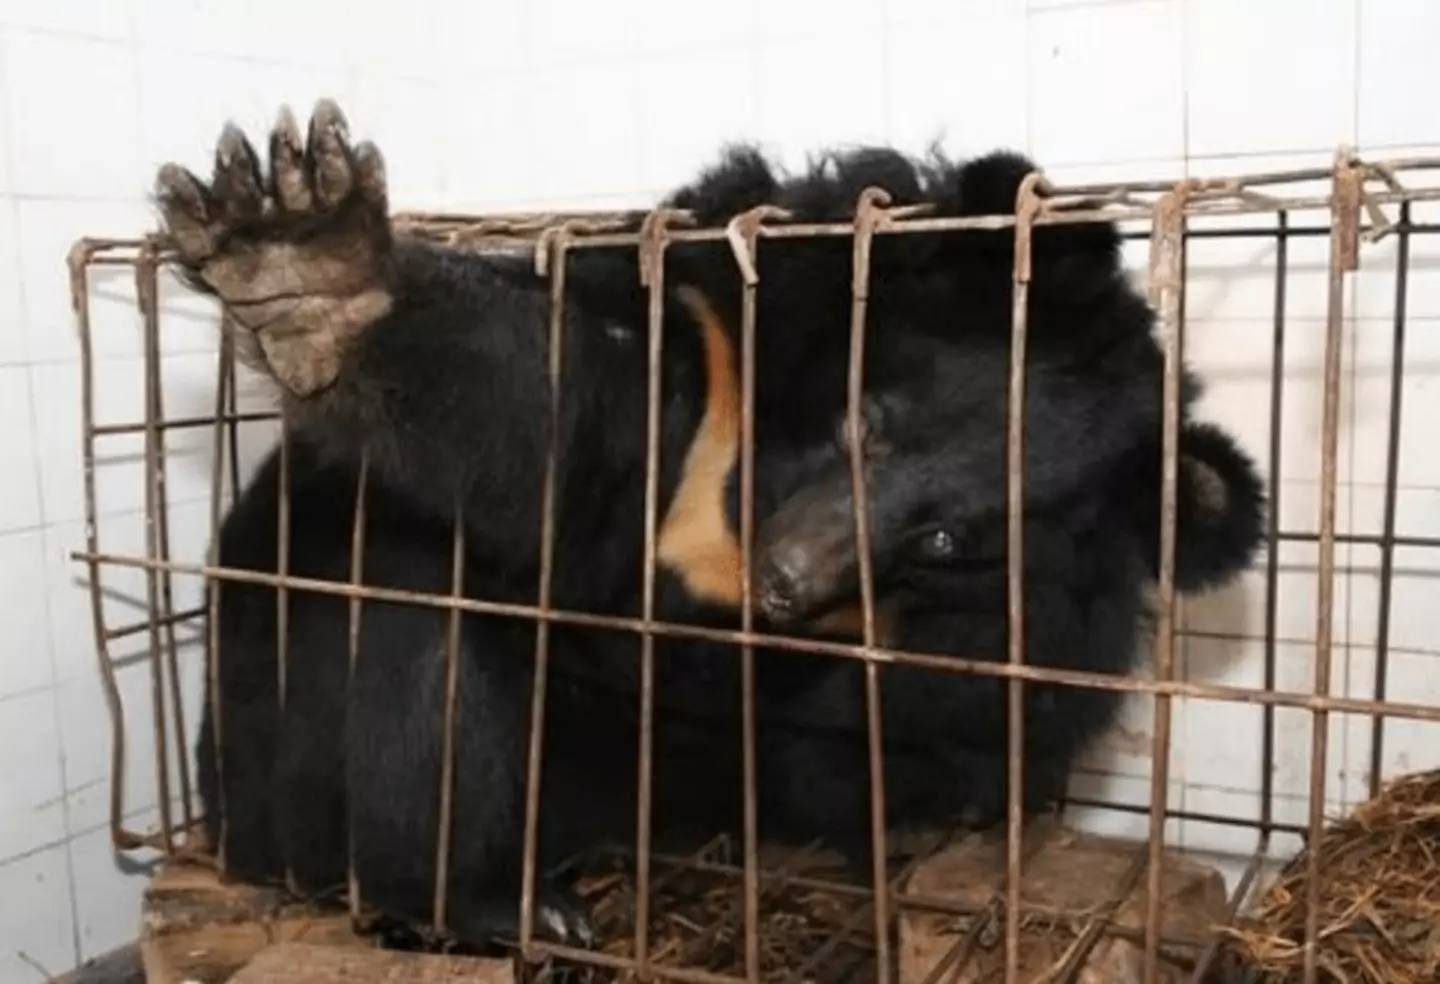 Thousands of bears are tortured for their bile.